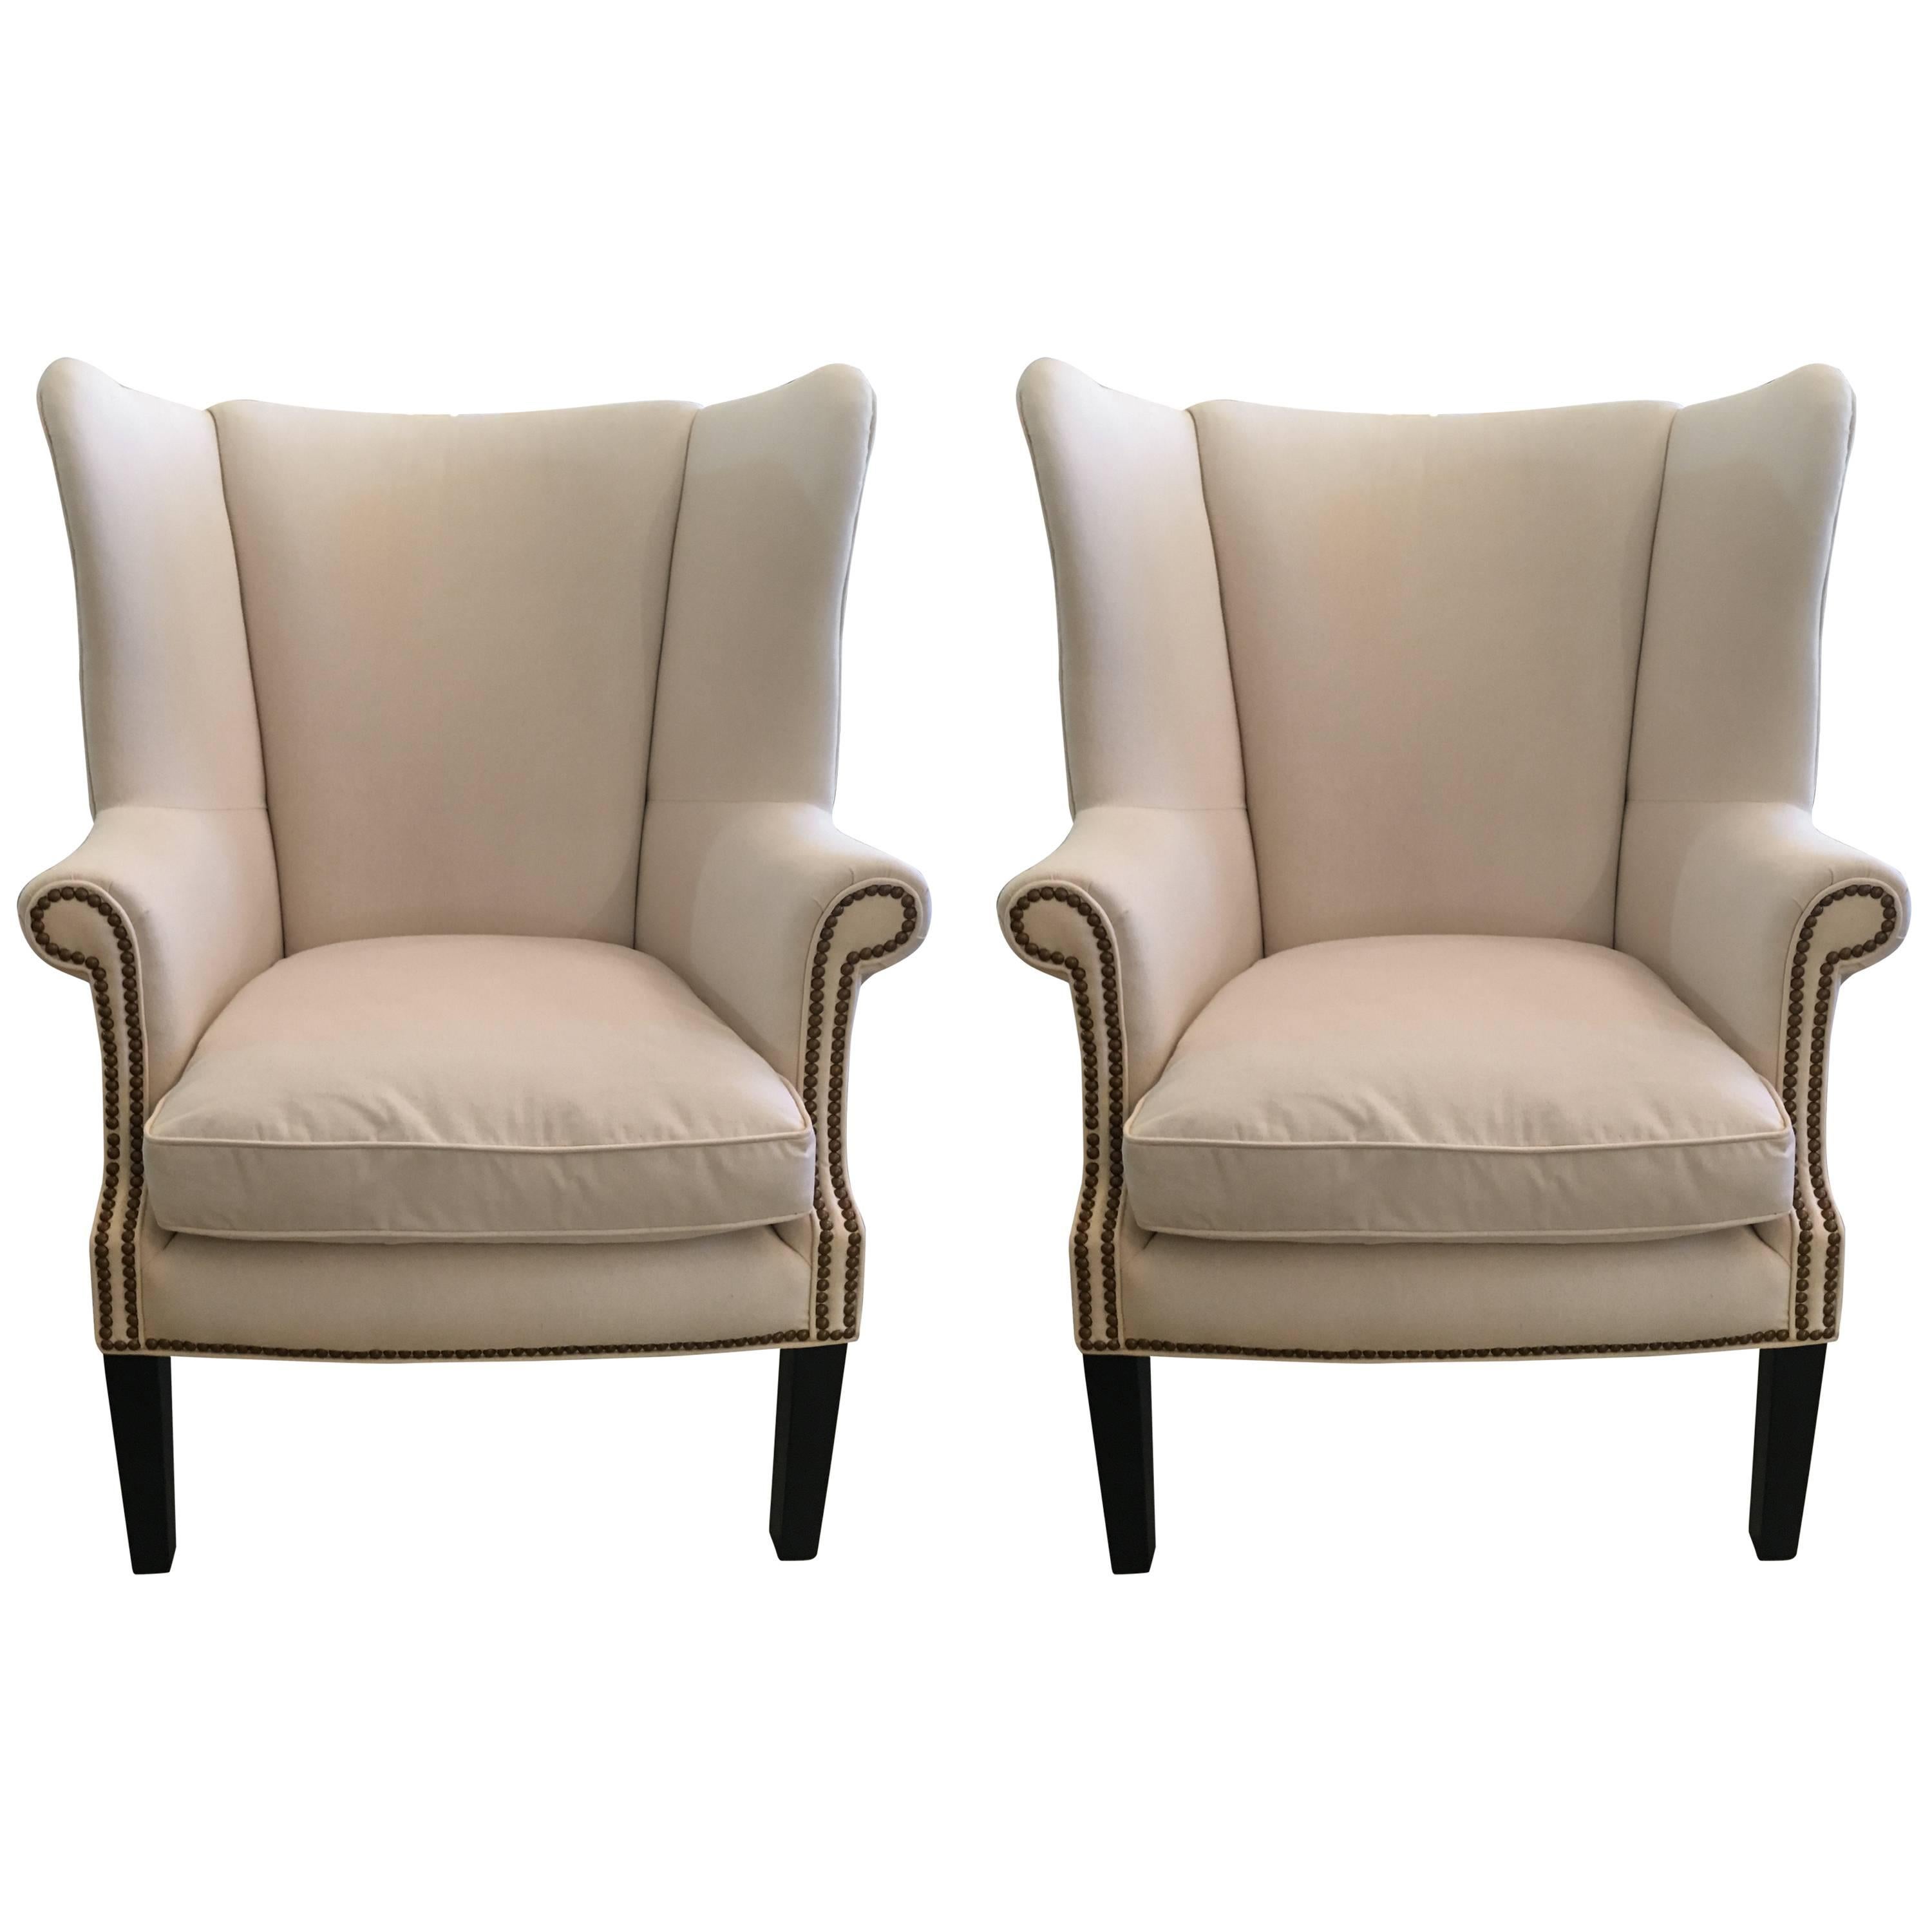 Sophisticated Pair of Cotton Duck Upholstered Wing Chairs